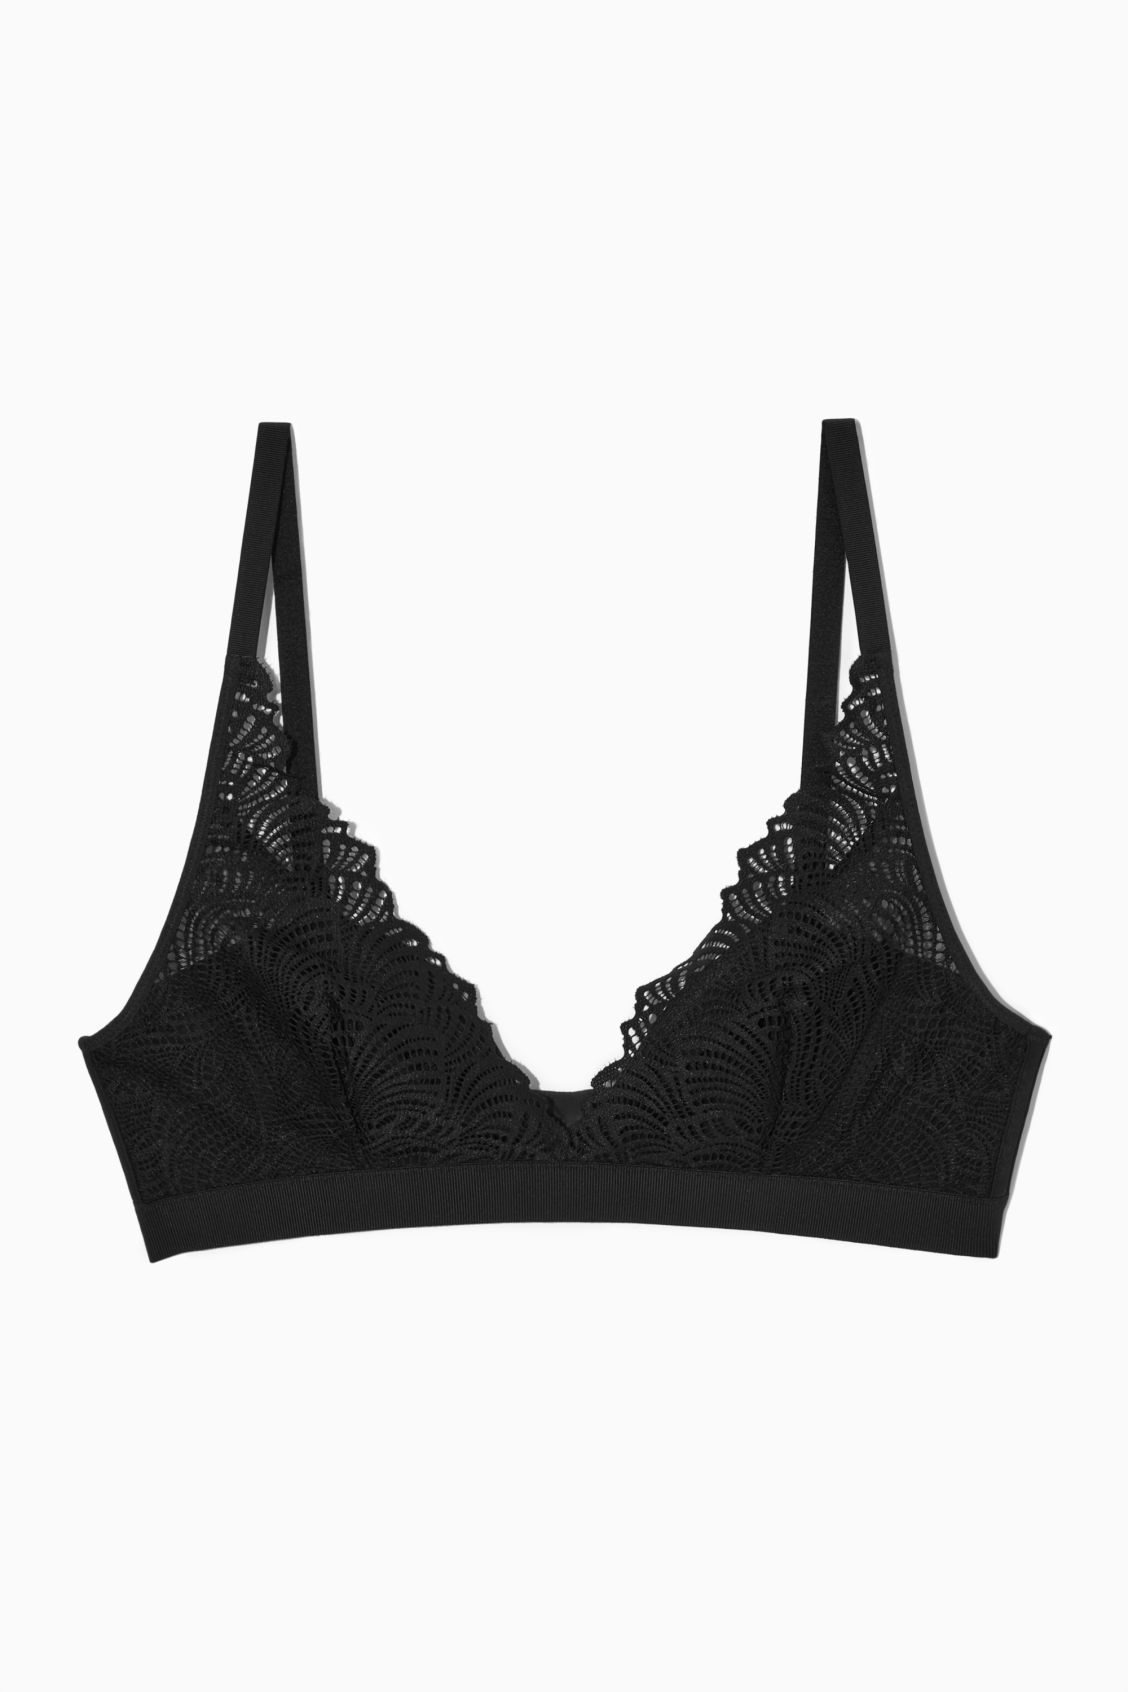 How Often Should You Wash Your Bra? We Have the Answer… | Who What Wear